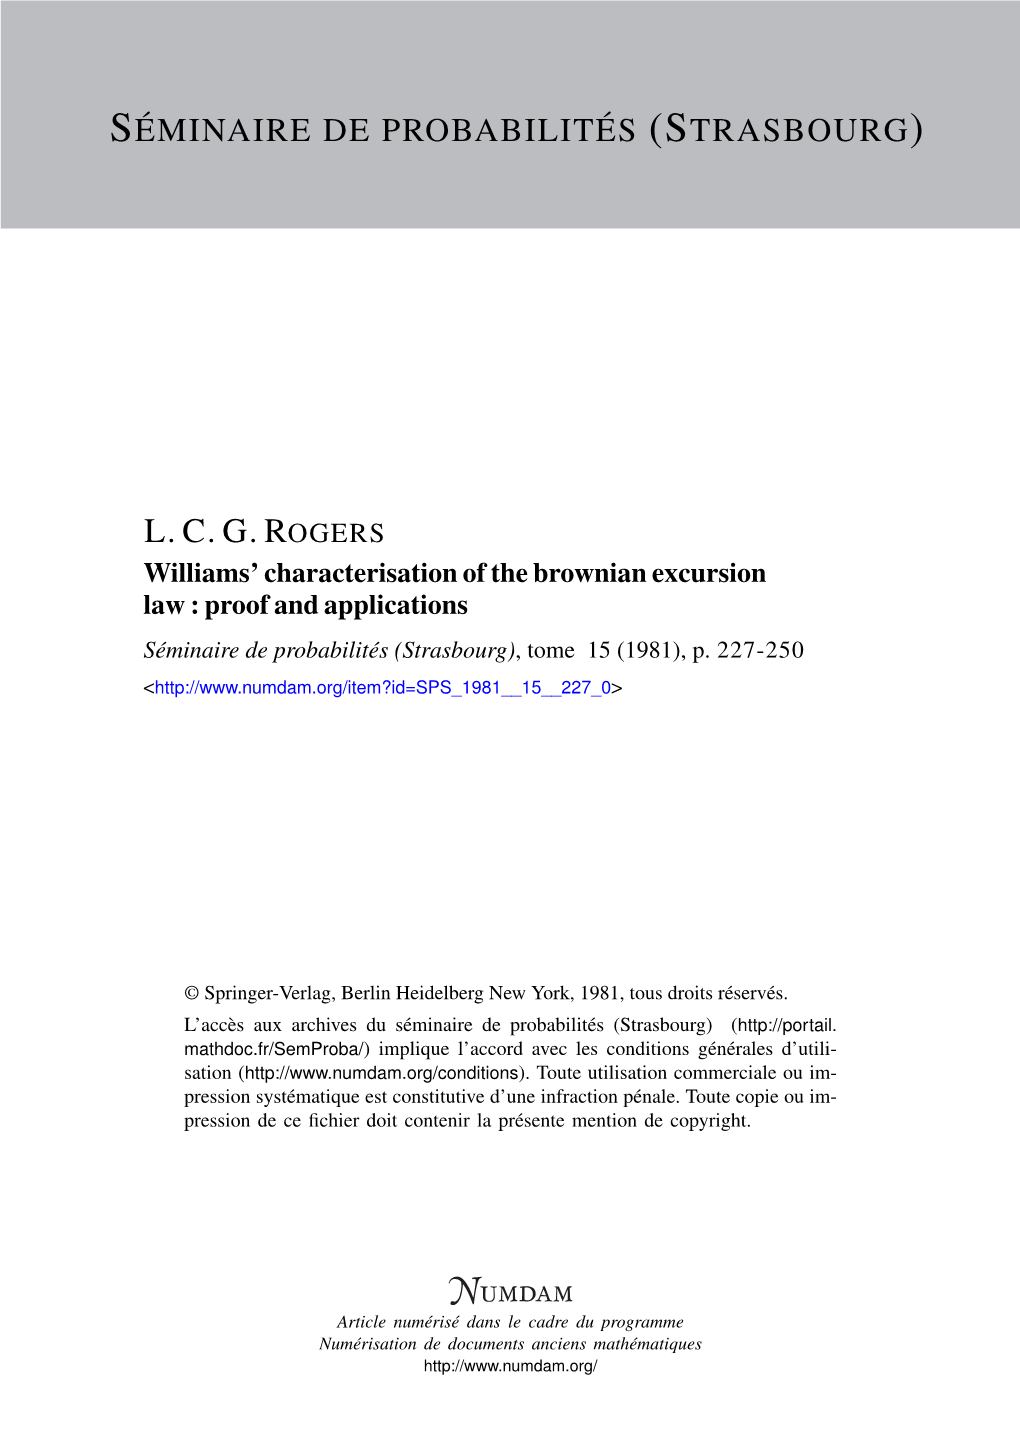 Williams' Characterisation of the Brownian Excursion